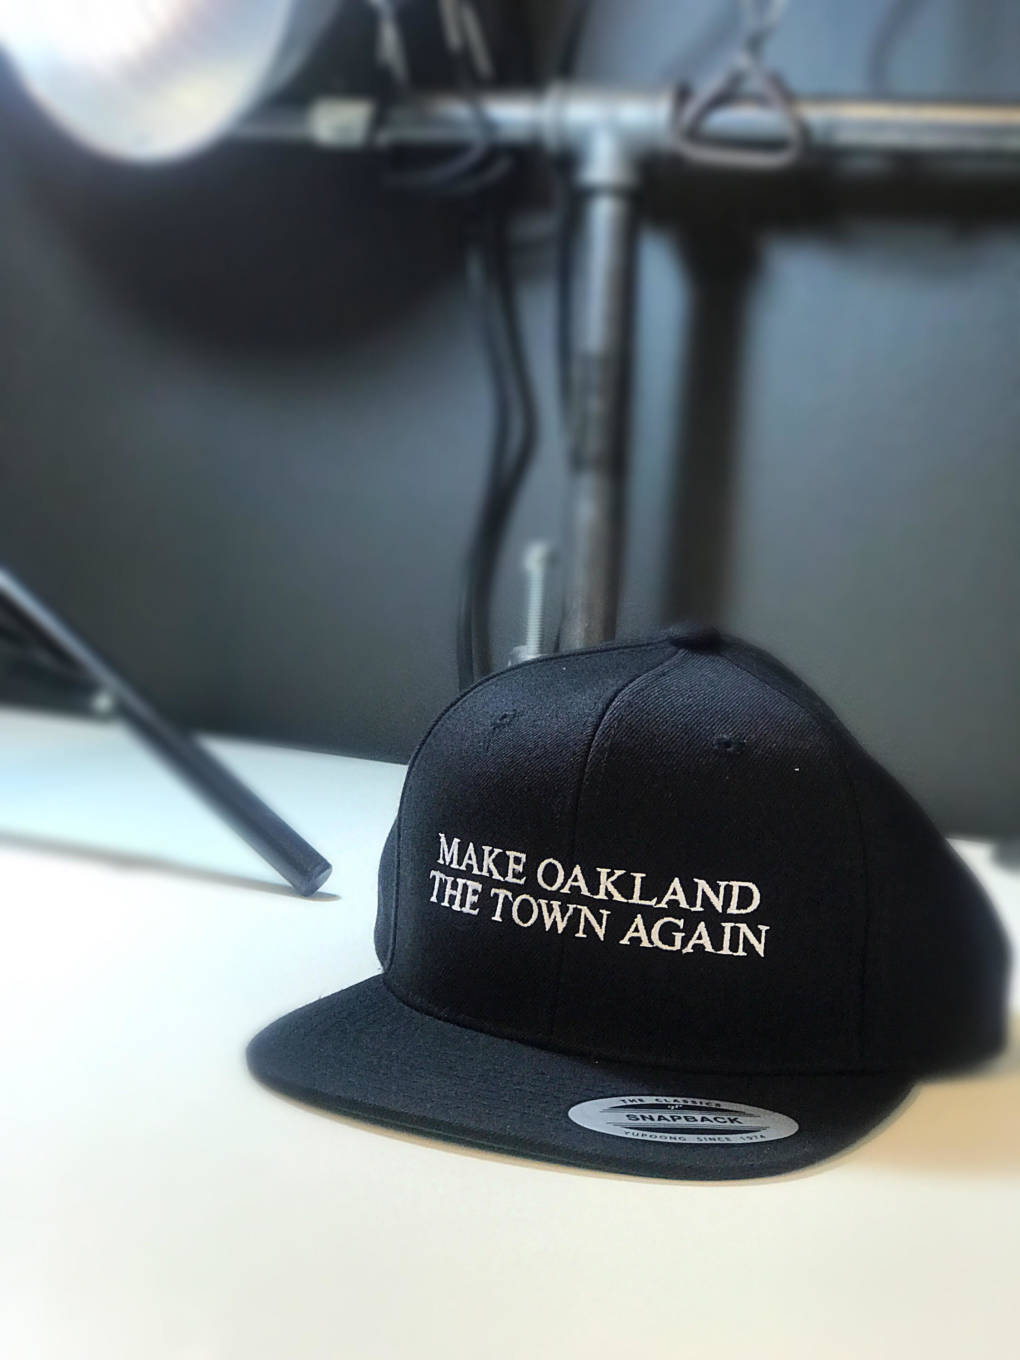 I Am The Town's 'Make Oakland The Town Again' hat.